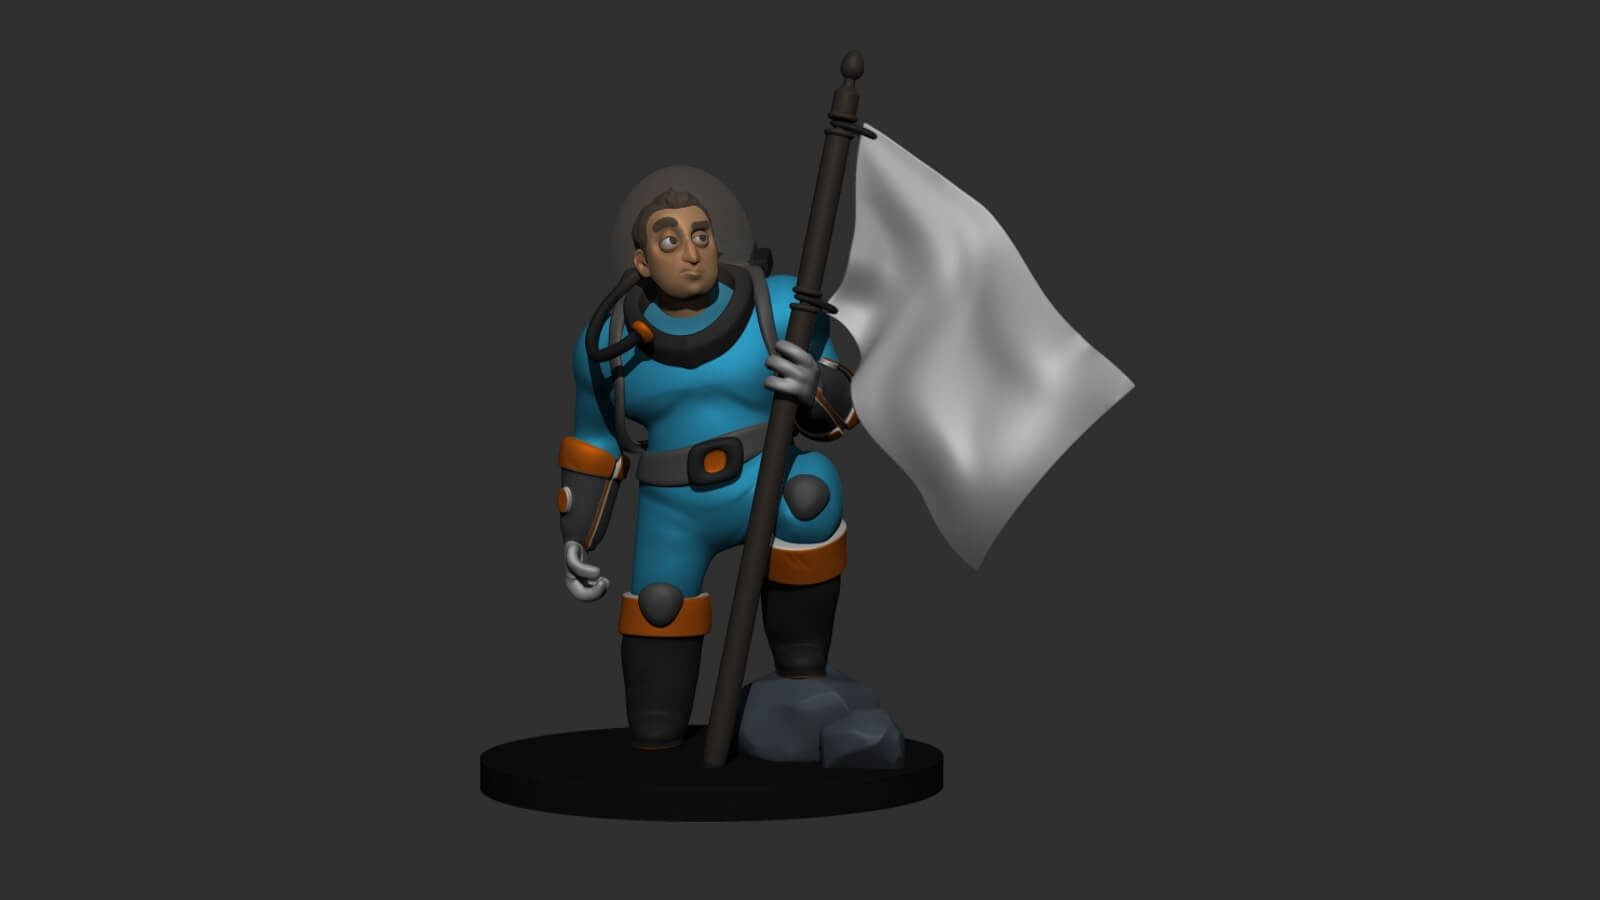 3D Sculpture of an astronaut character holding a white flag, standing on a base.